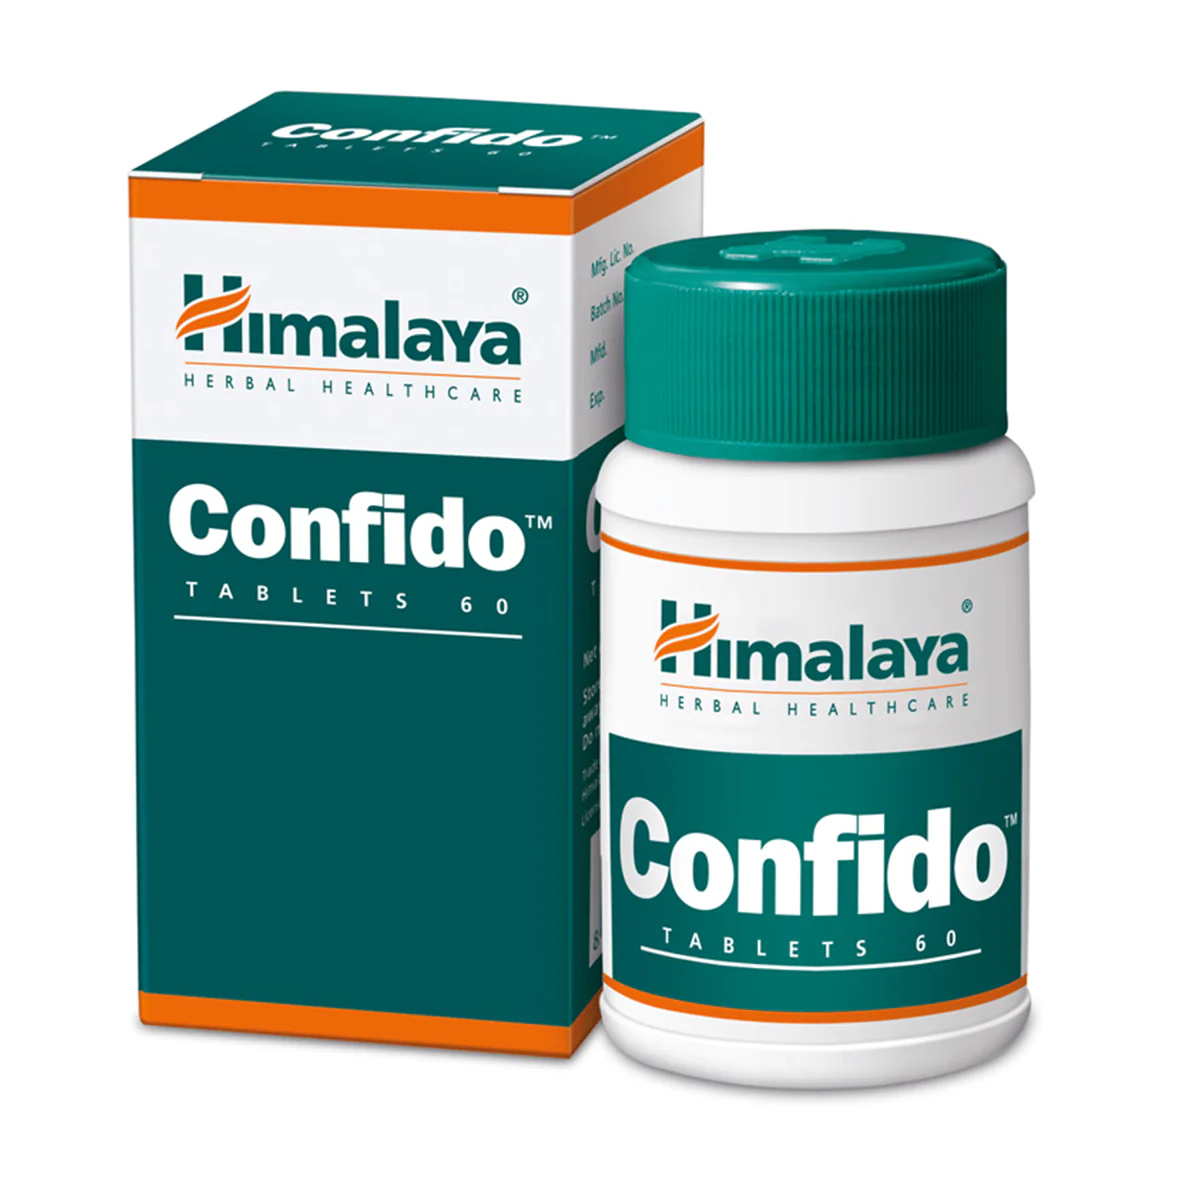 Confido Tablets 60 - Buy Confido Tablets 60 at Best Price in NepMeds